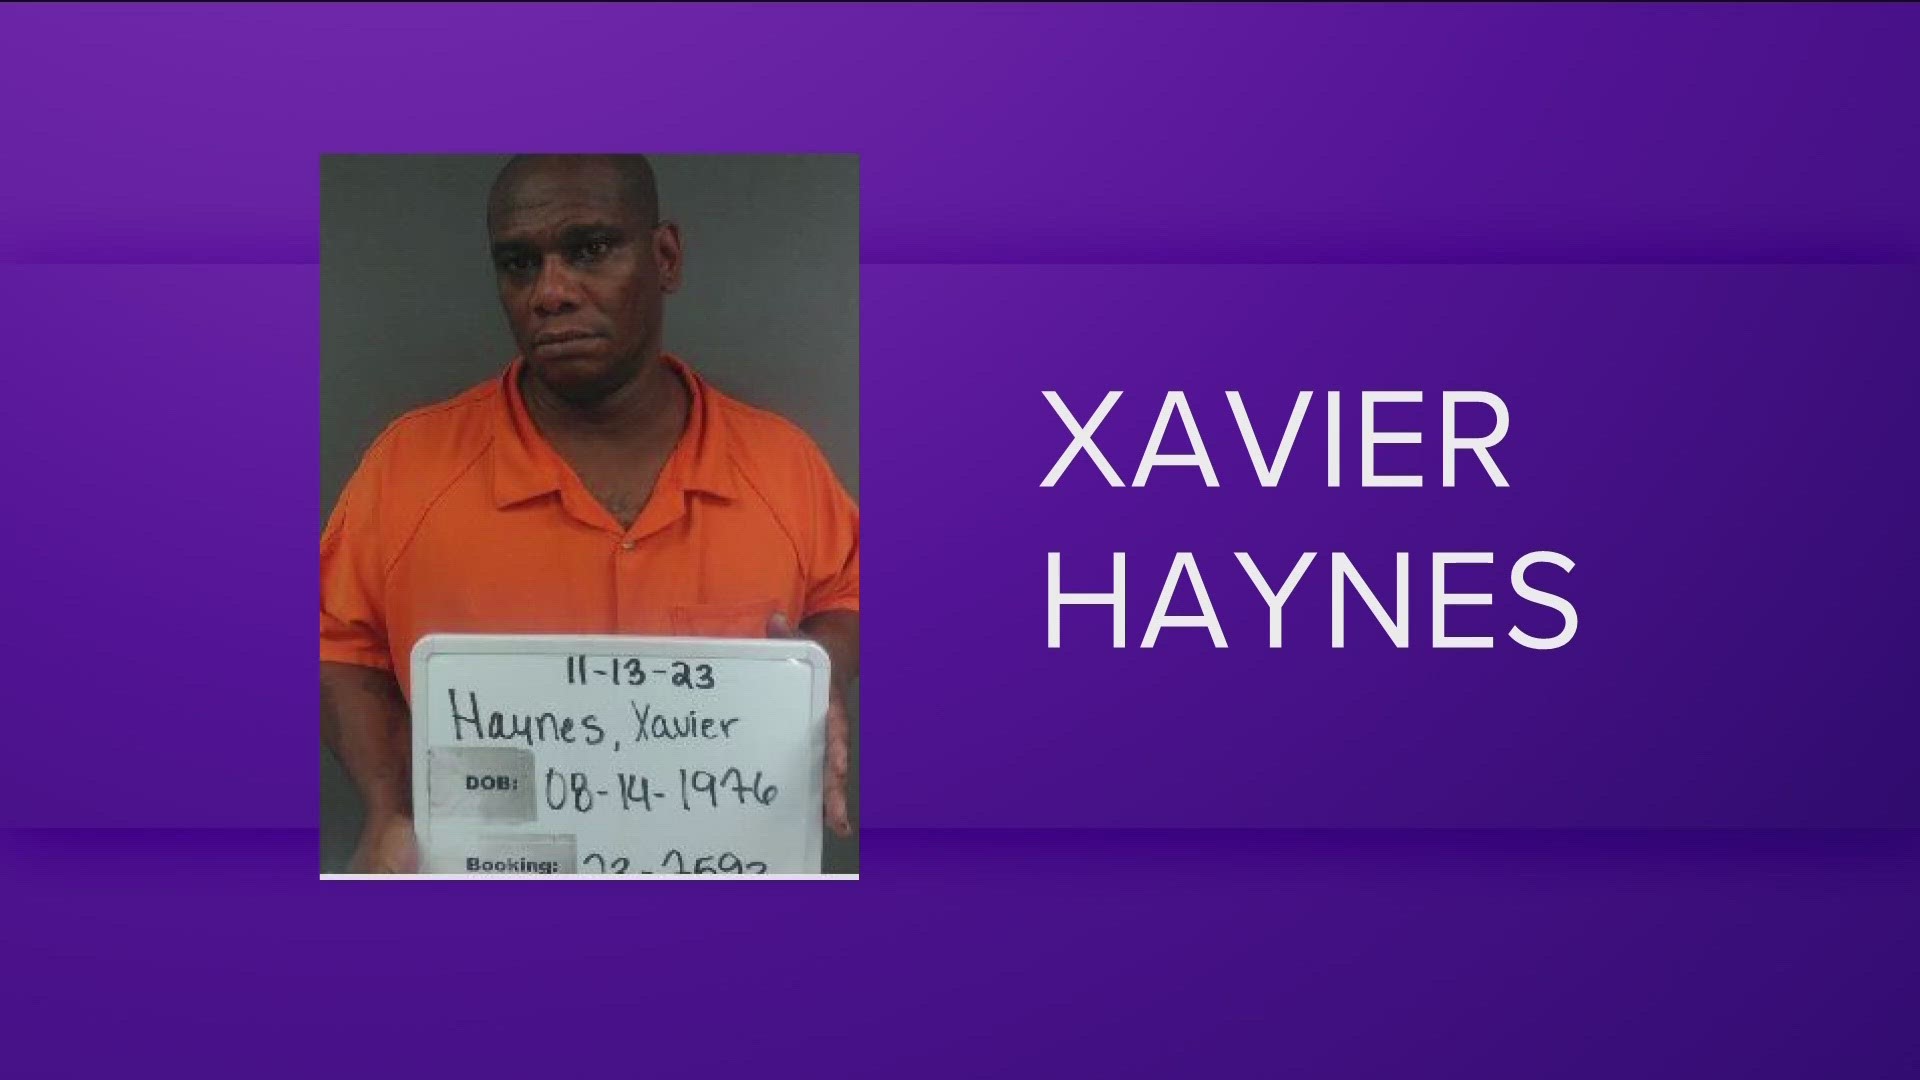 Officers found Xavier Haynes with over five pounds of meth, an ounce of cocaine, and THC products.